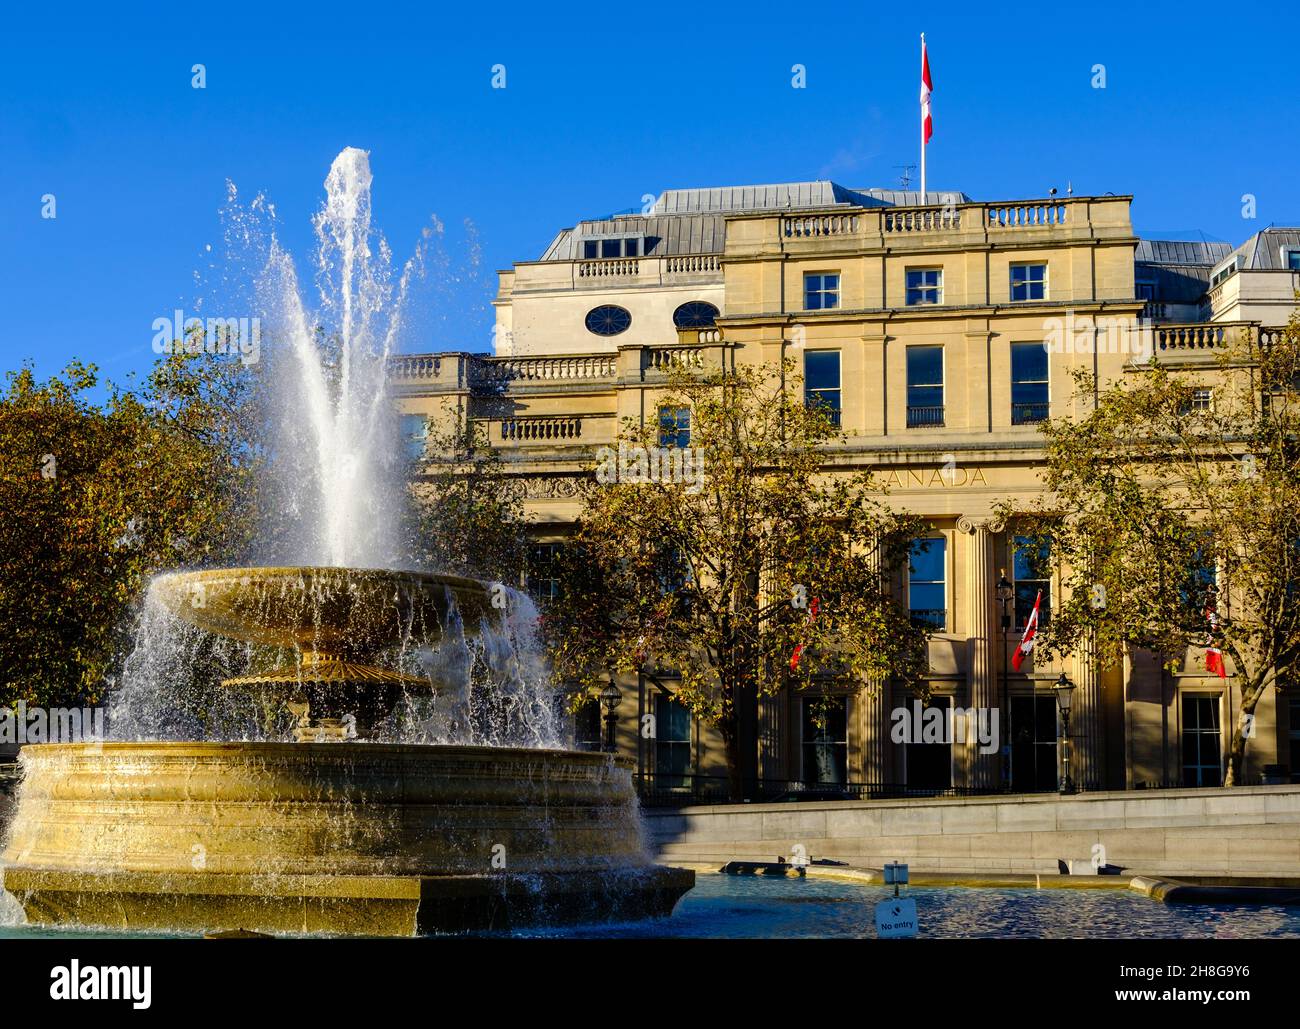 The Canadian High Commission in London as seen from Trafalgar Square Stock Photo